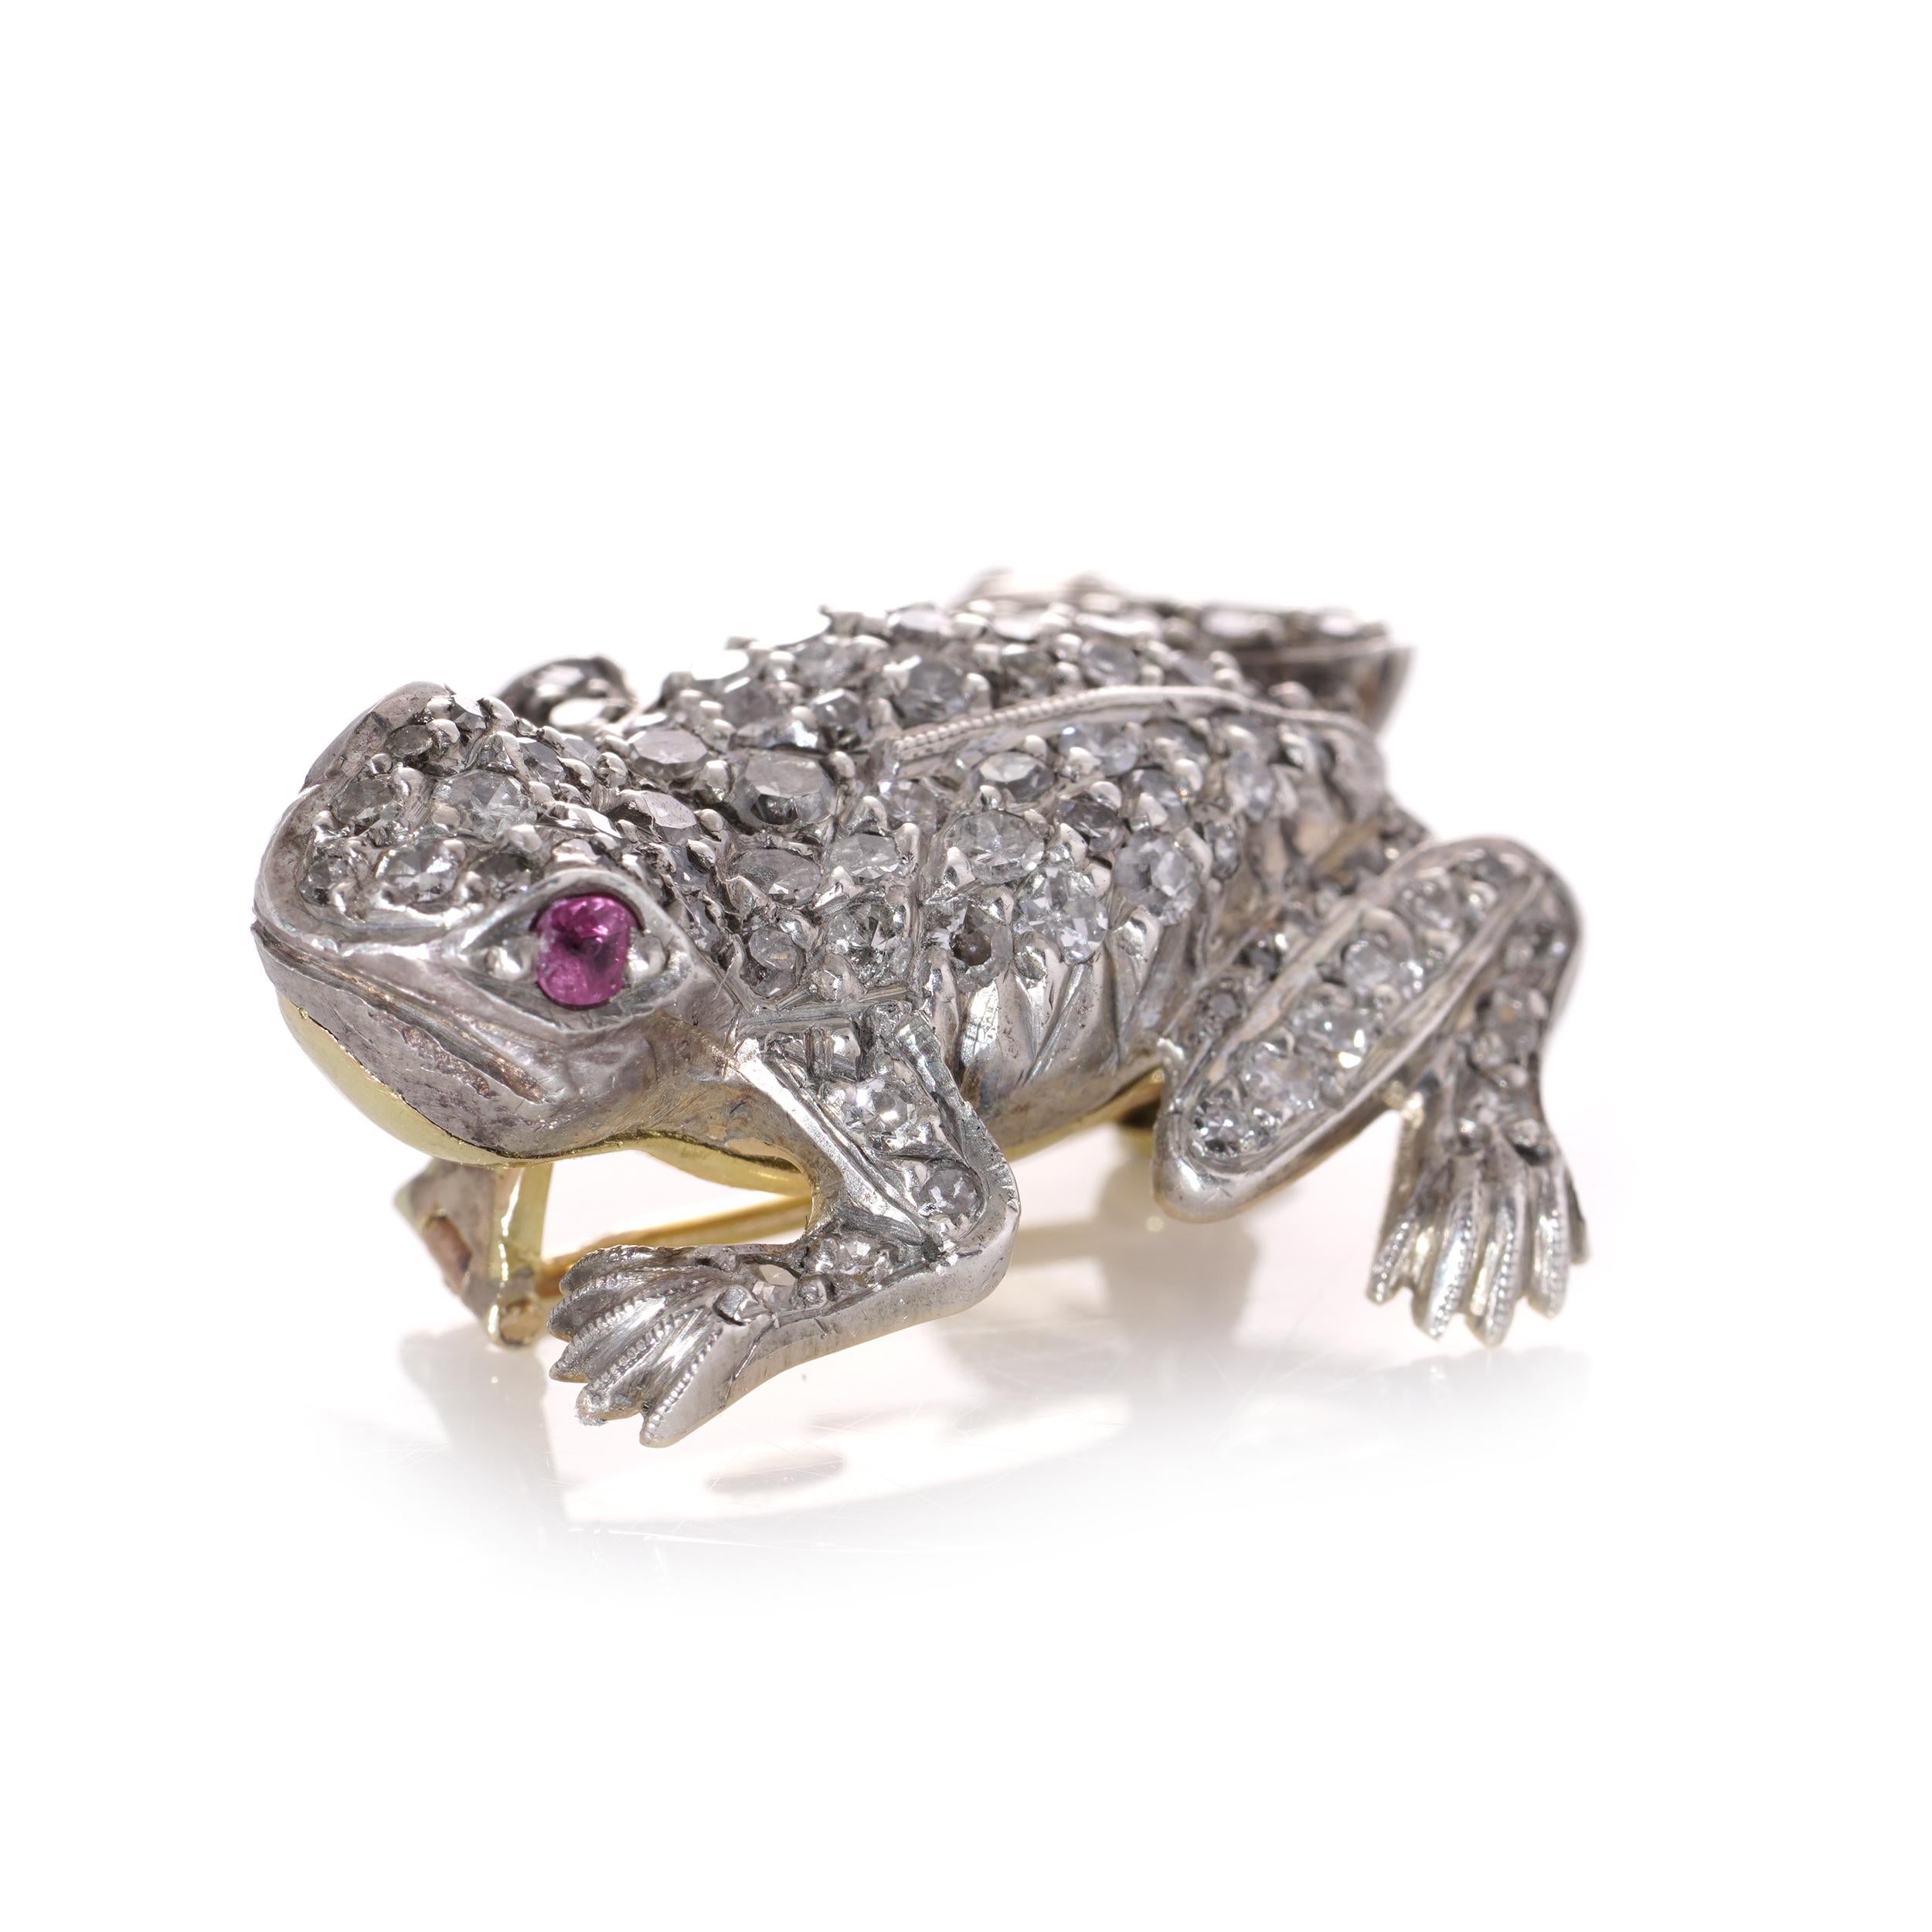 Edwardian 15kt gold and silver frog brooch with diamonds and rubies In Good Condition For Sale In Braintree, GB